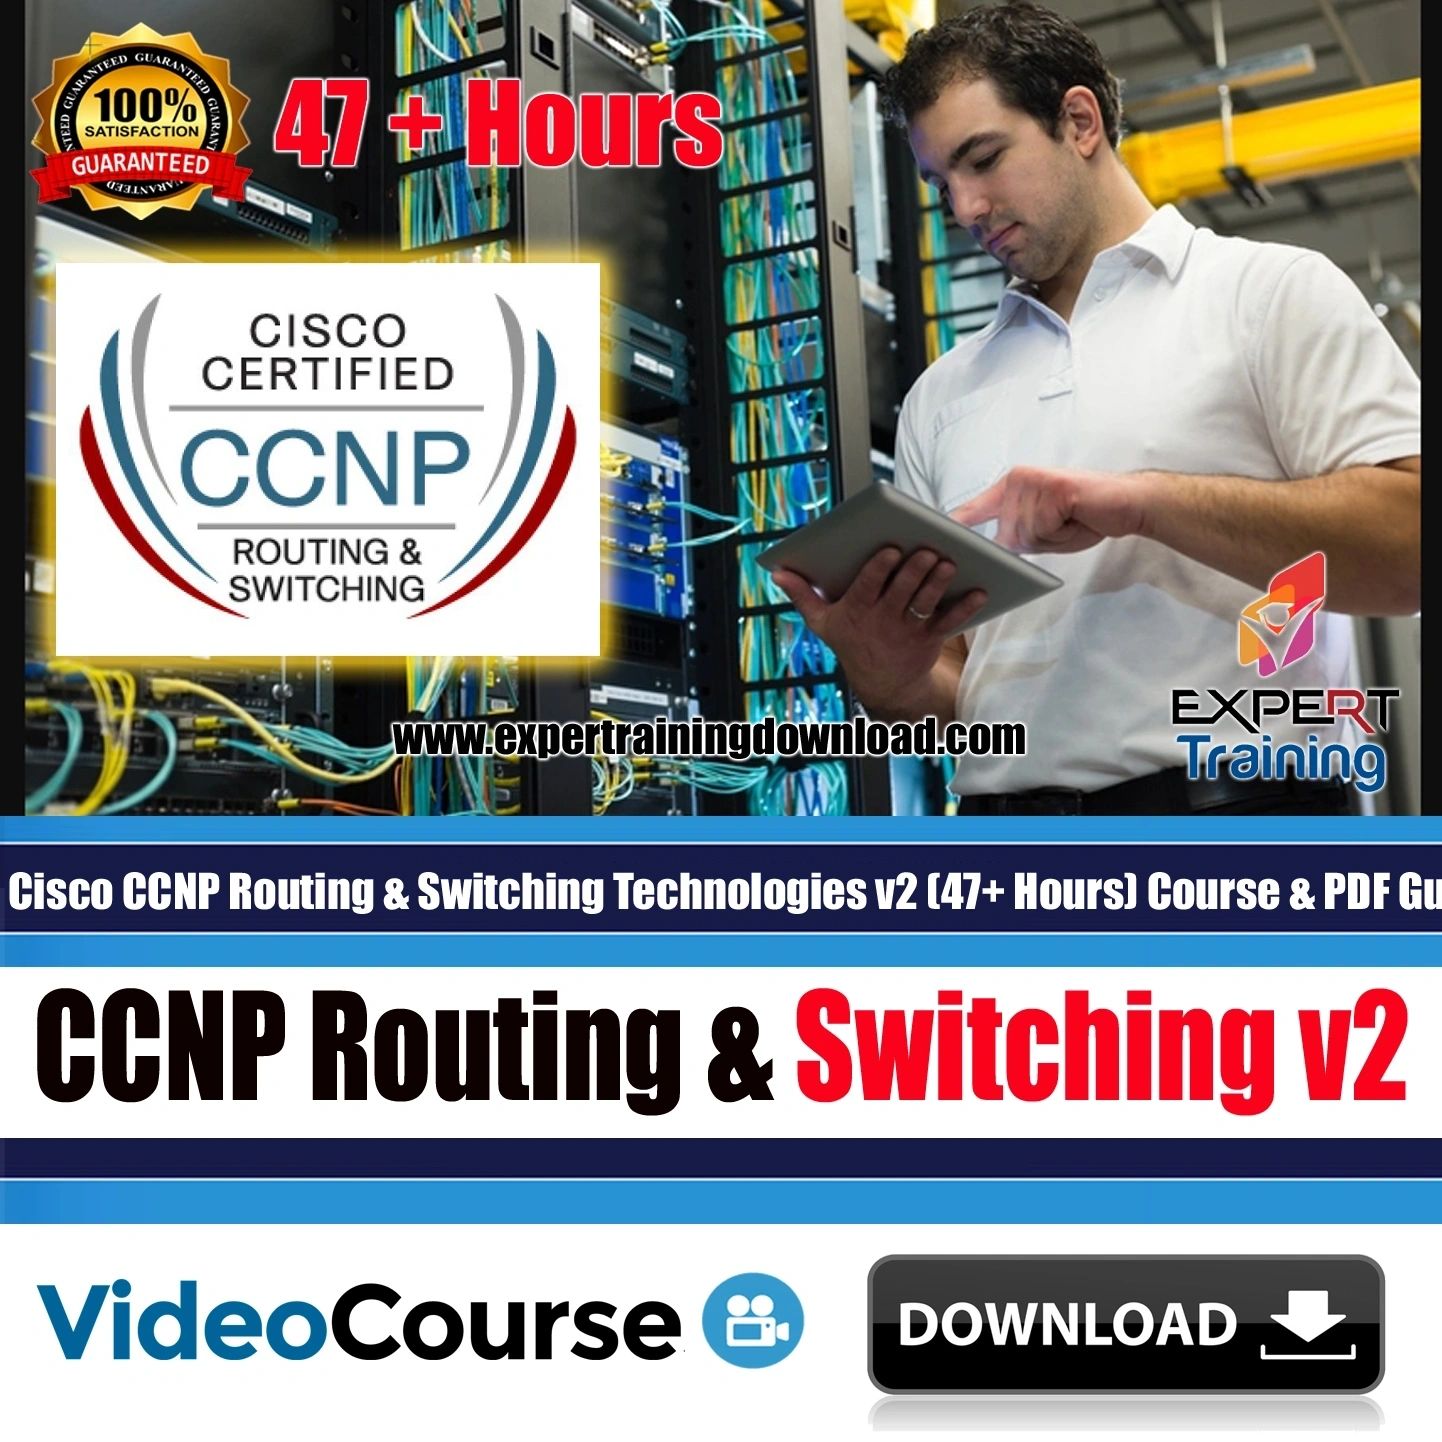 Cisco CCNP Routing & Switching Technologies v2 (47+ Hours) Course & PDF Guides